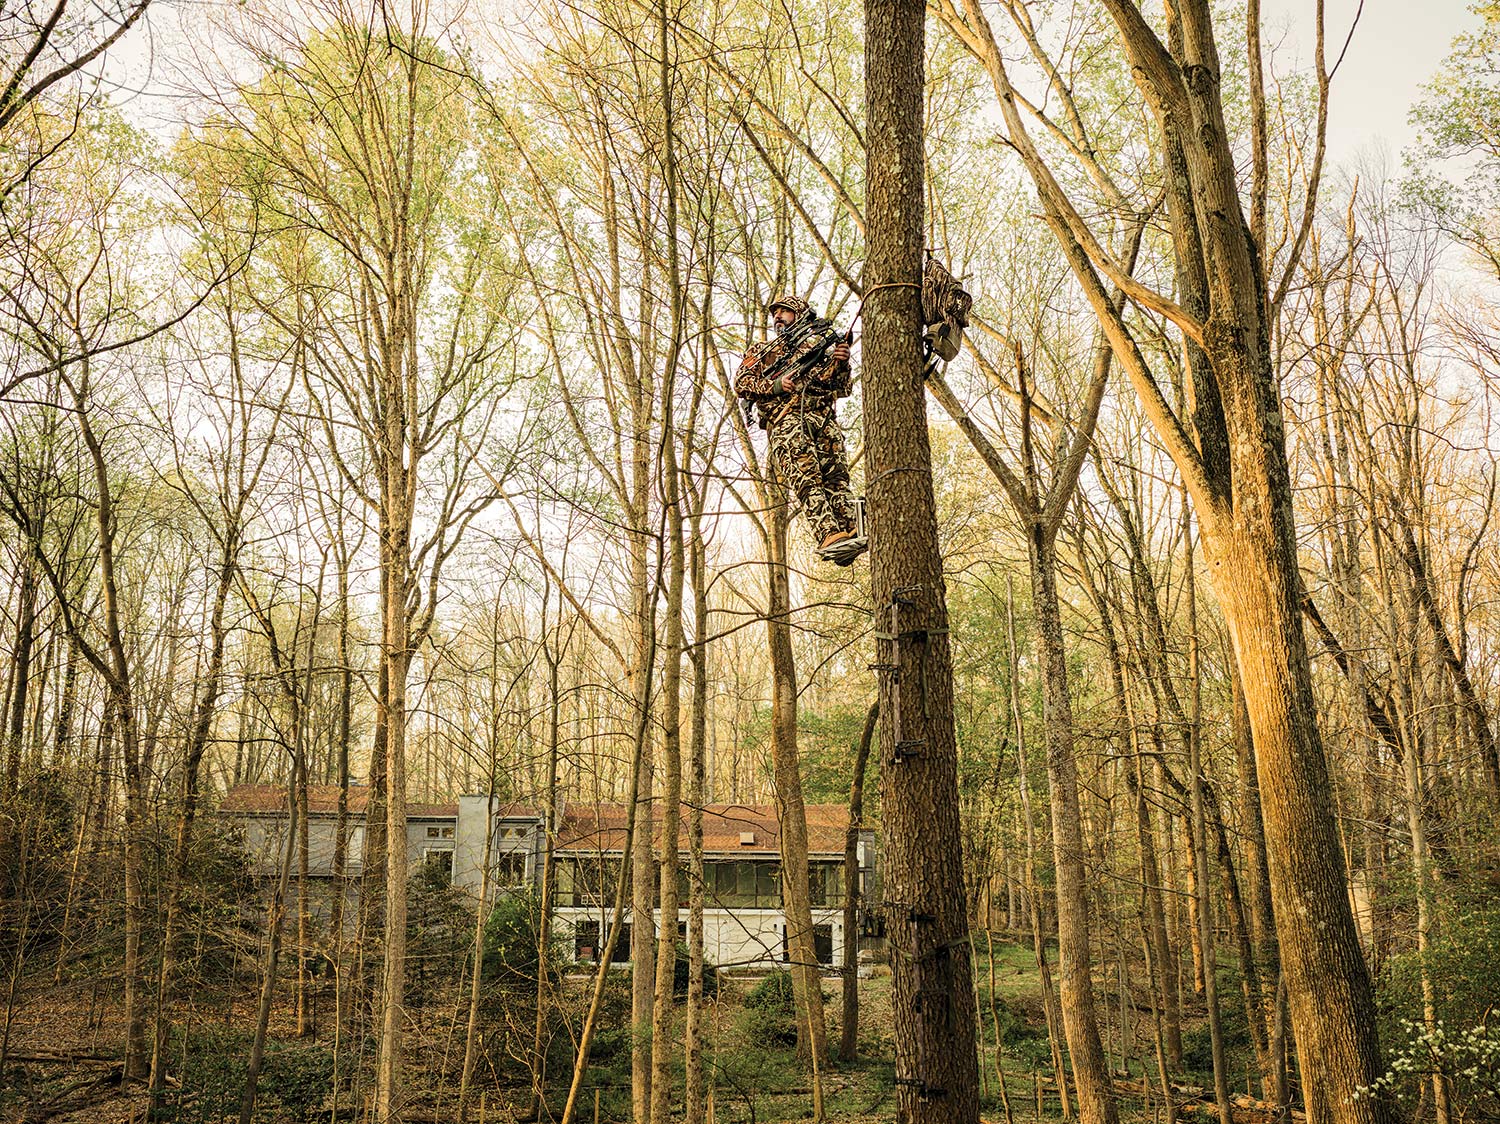 A hunter climbs up in a tree stand in his back yard.